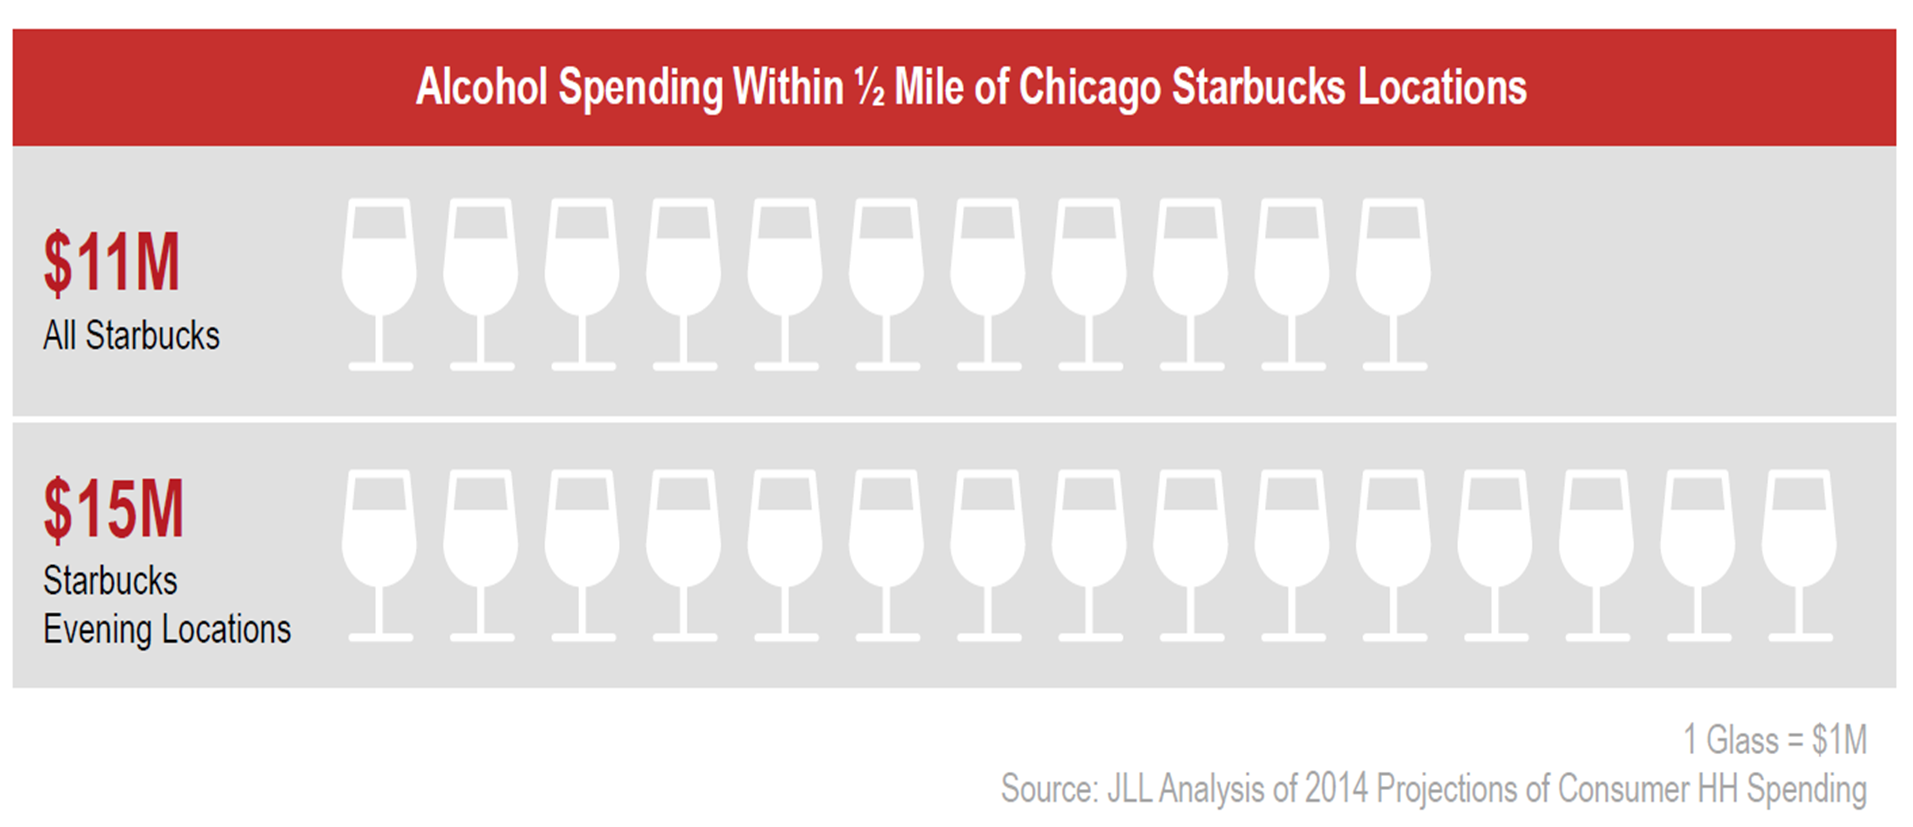 Alcohol Spending within half mile of Chicago Starbucks location